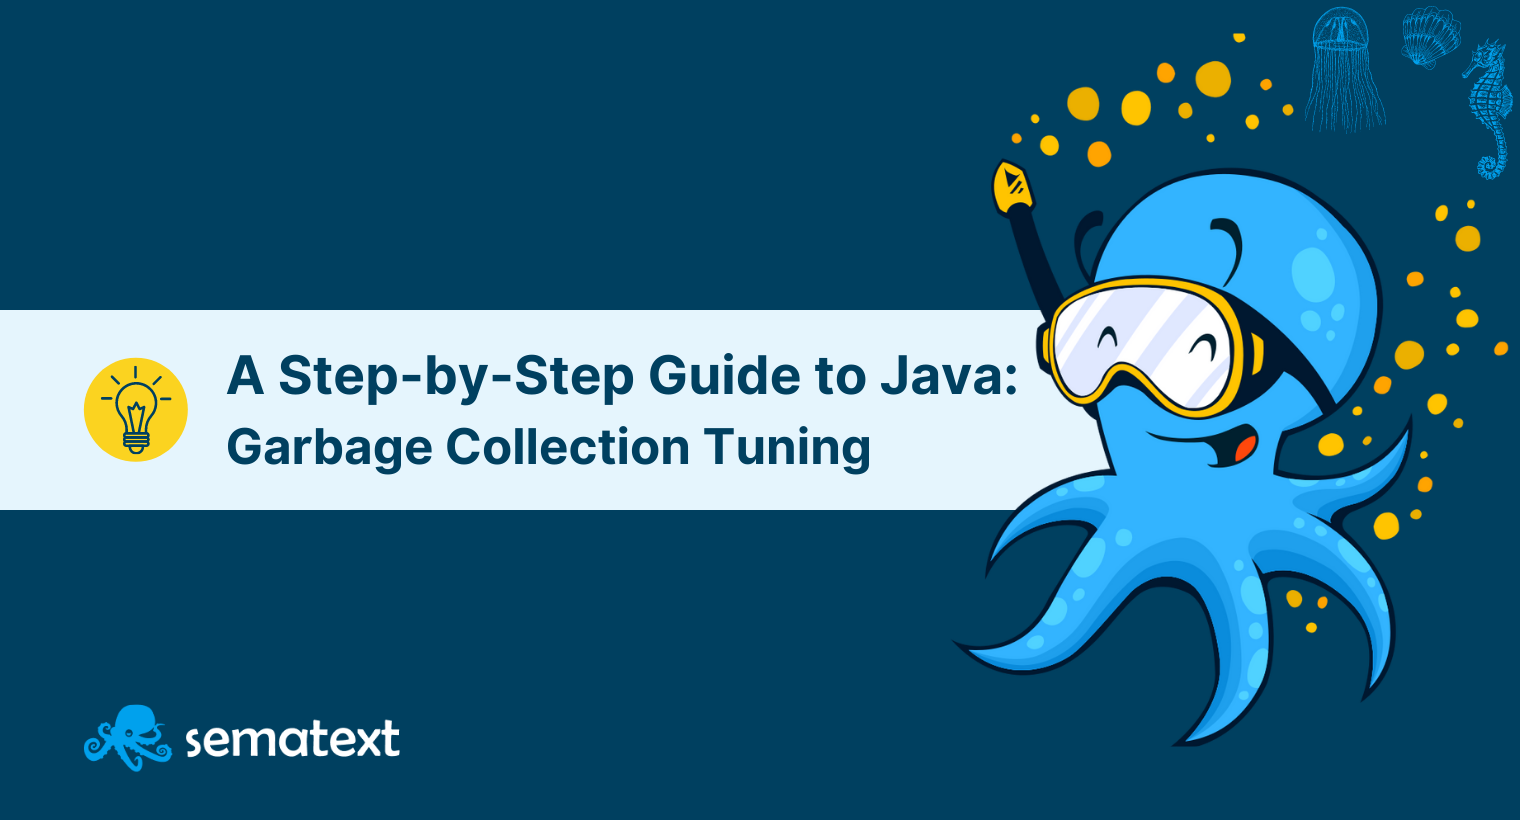 A Step-by-Step Guide to Java Garbage Collection Tuning